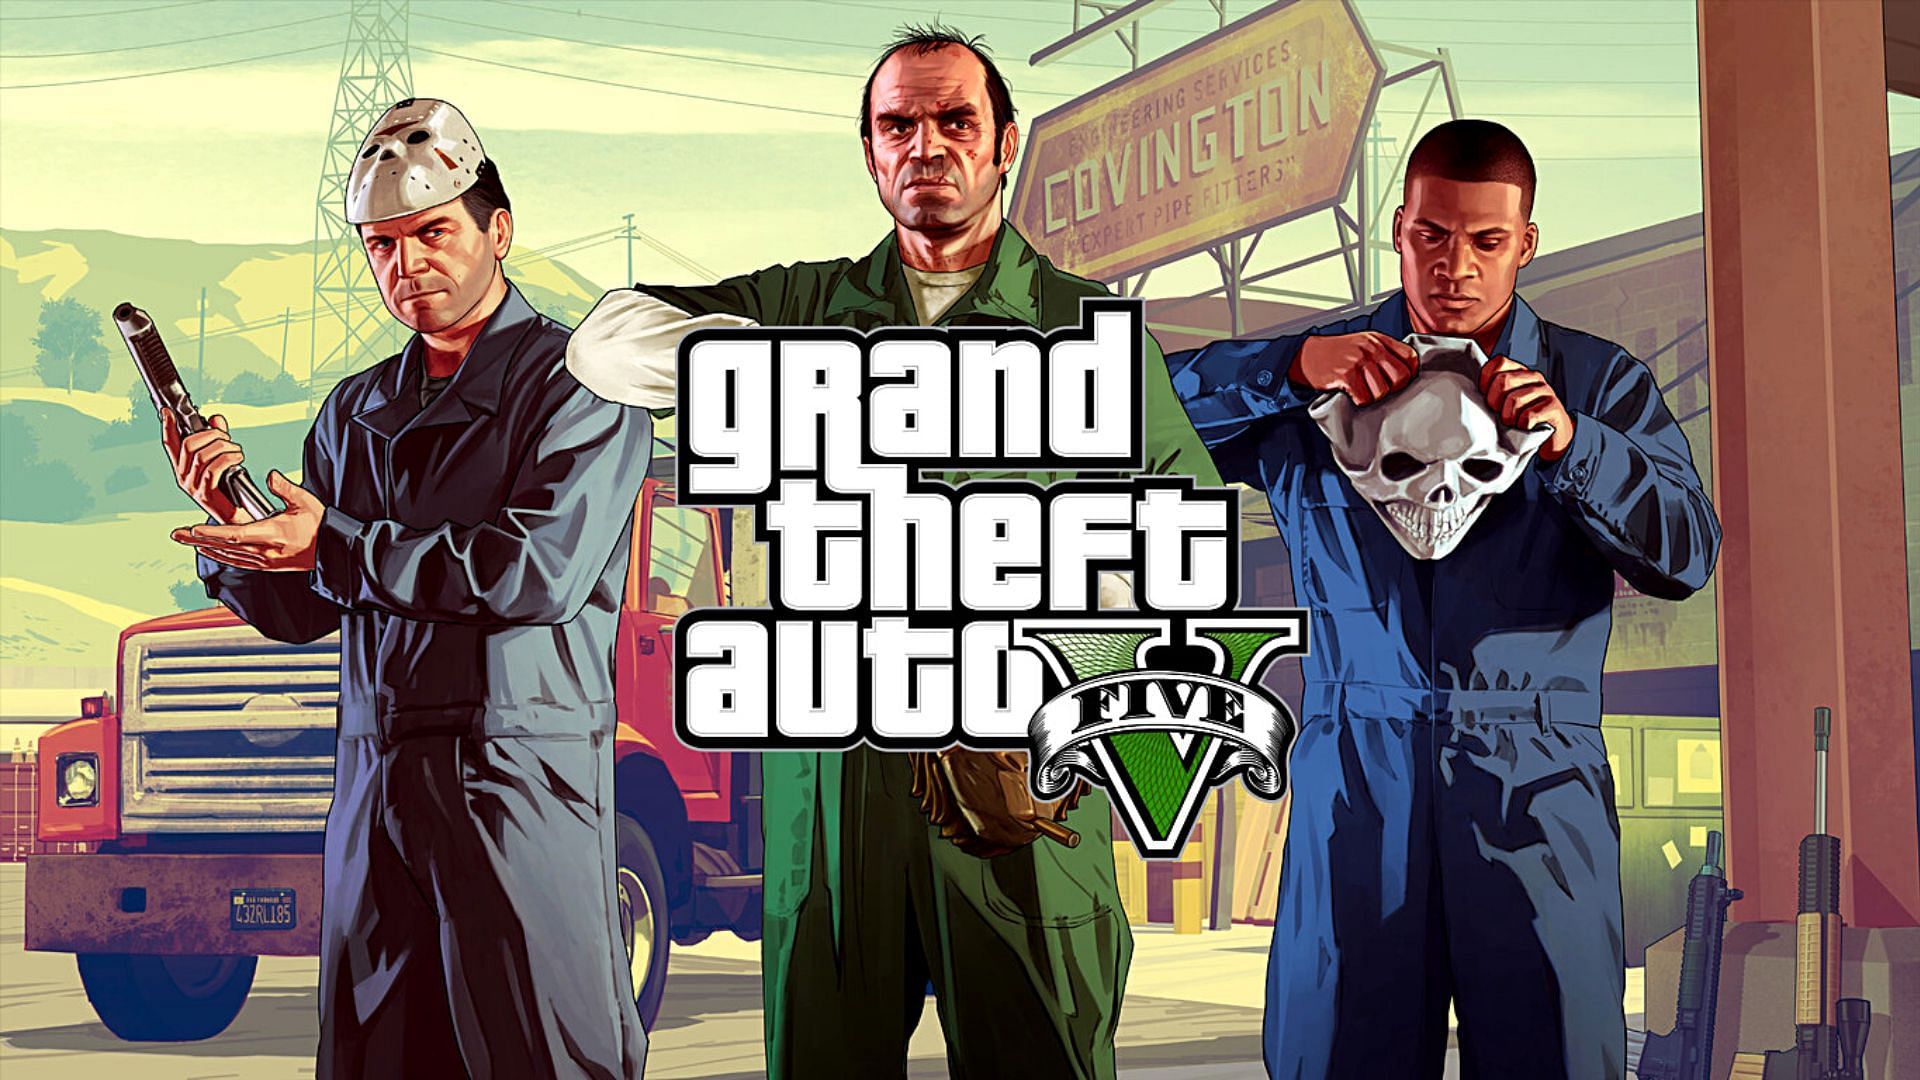 A brief report on GTA franchise generating over $8.33 billion in revenue since GTA 5